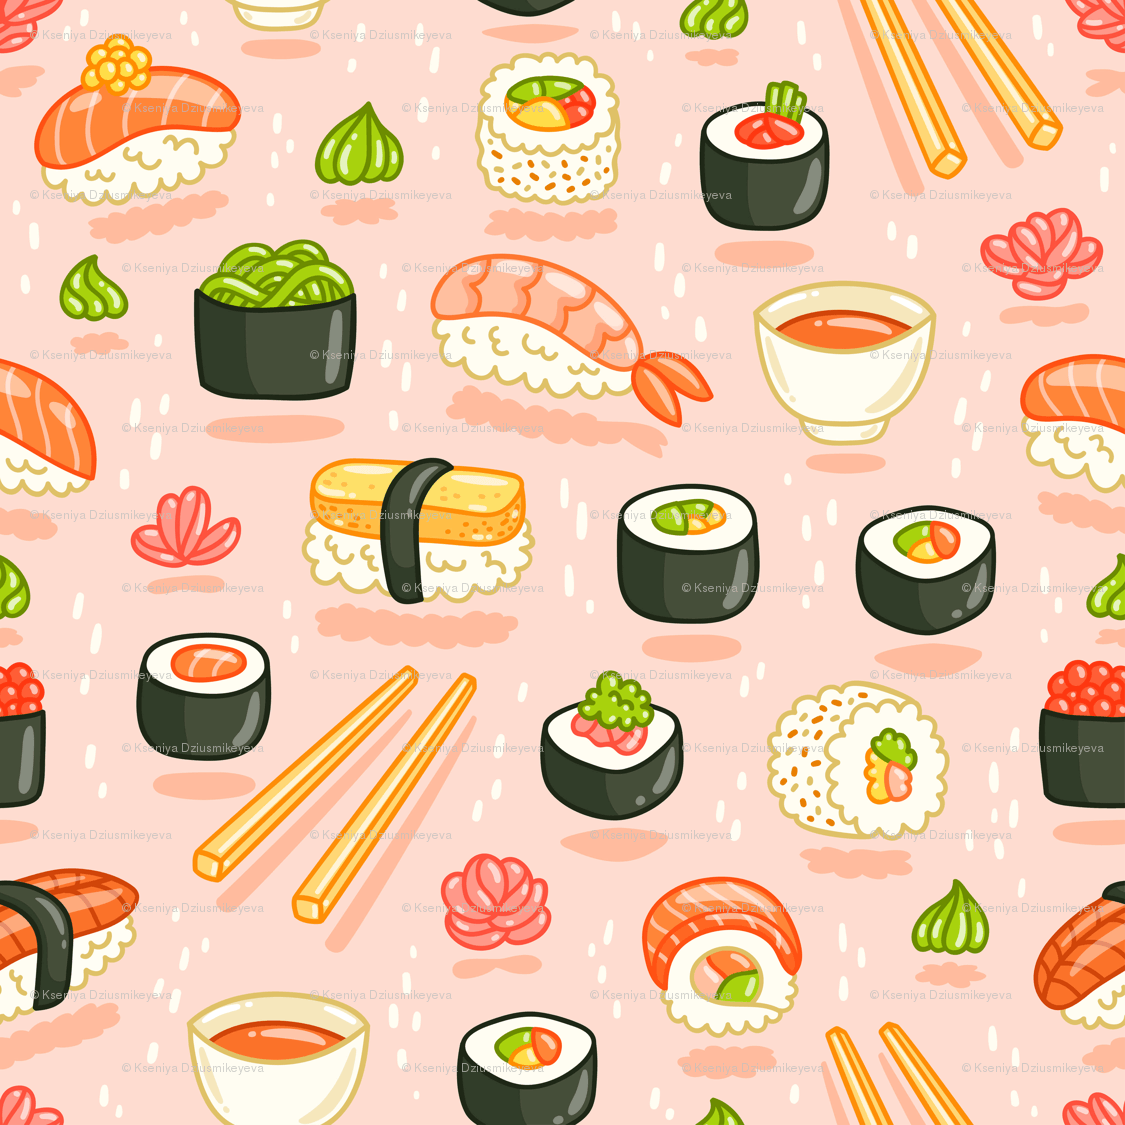 Japanese Food Wallpaper Posted By Michelle Walker